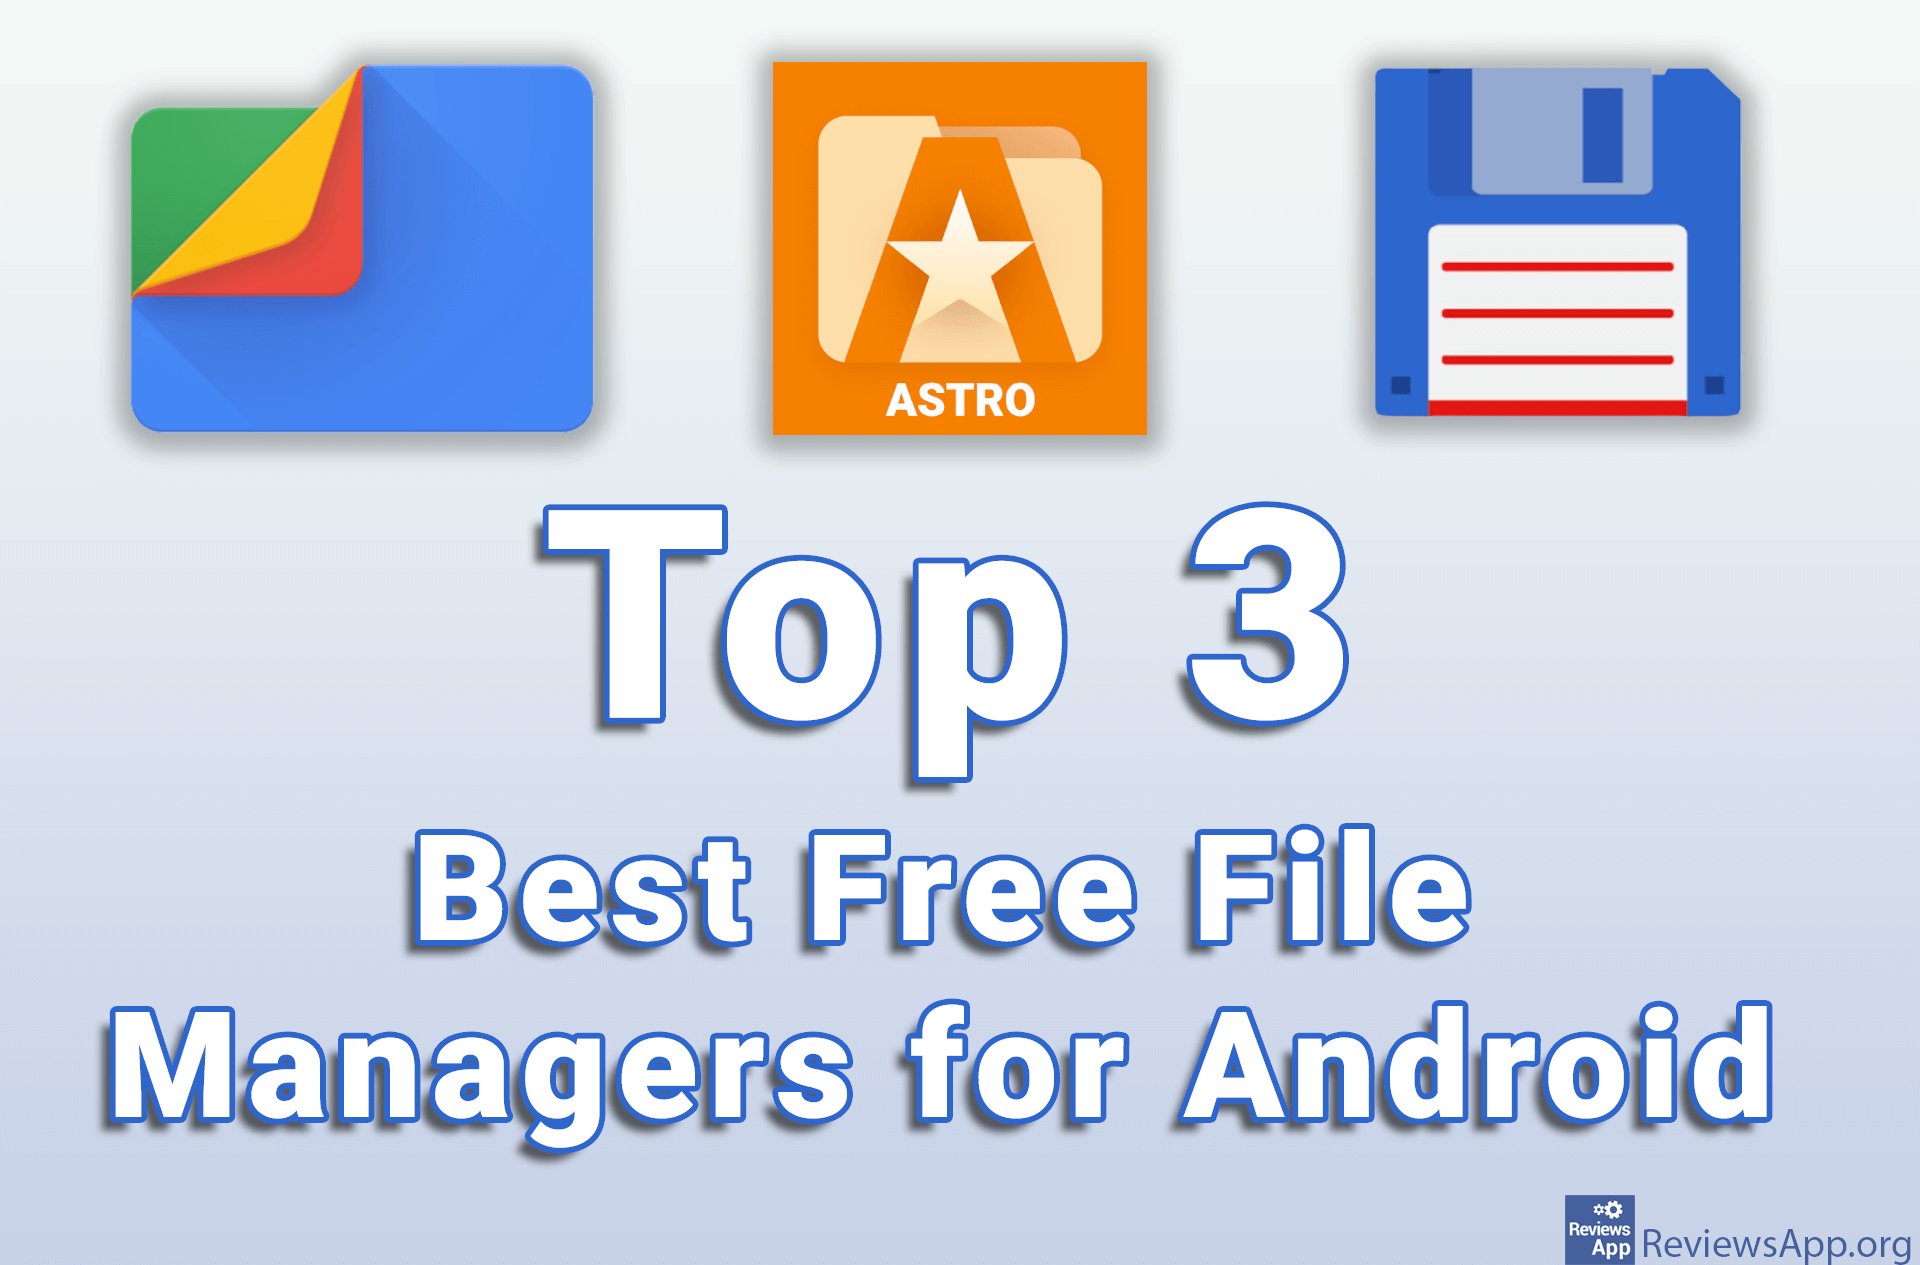 Top 3 Best Free File Managers for Android